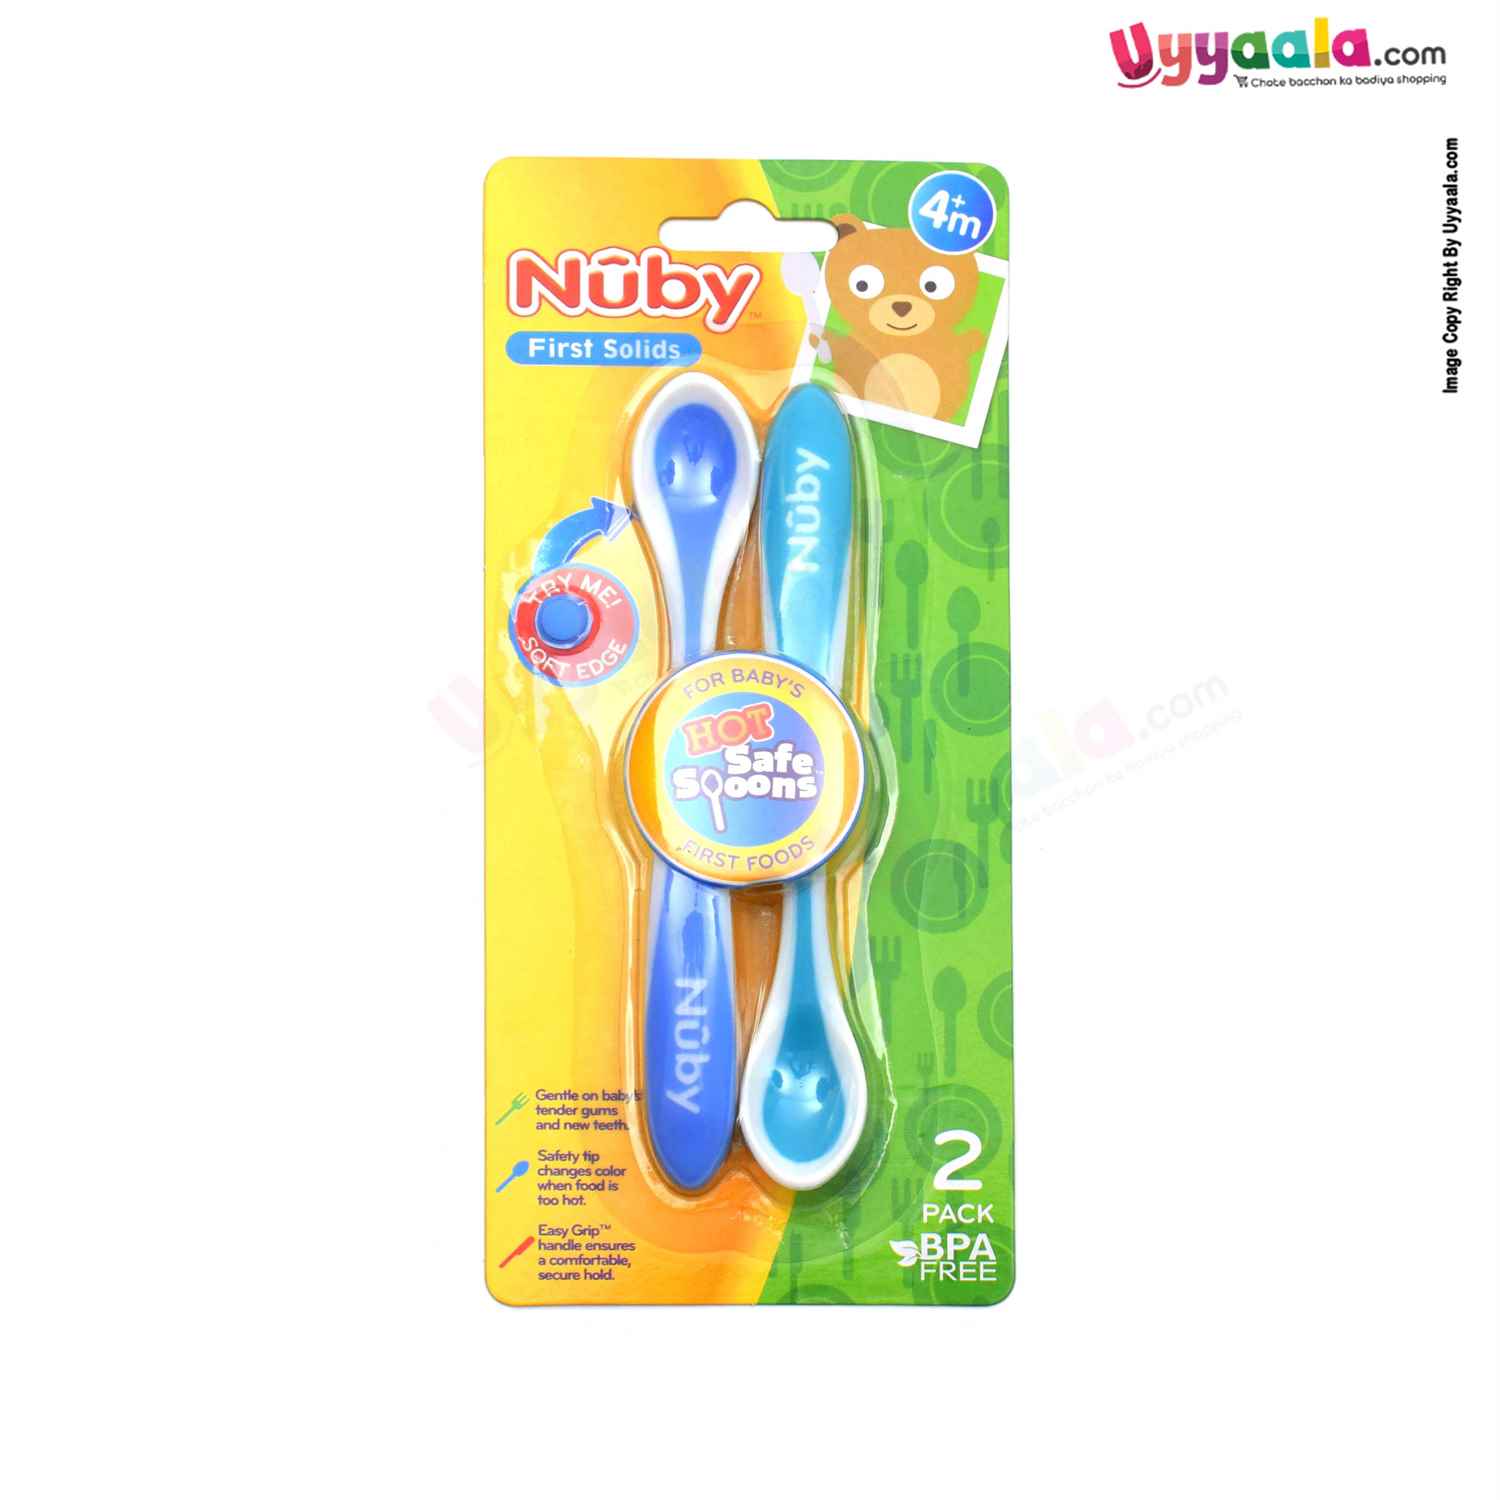 NUBY Hot safe spoons for babies first foods, Pack of 2- Green & Blue, 4+m